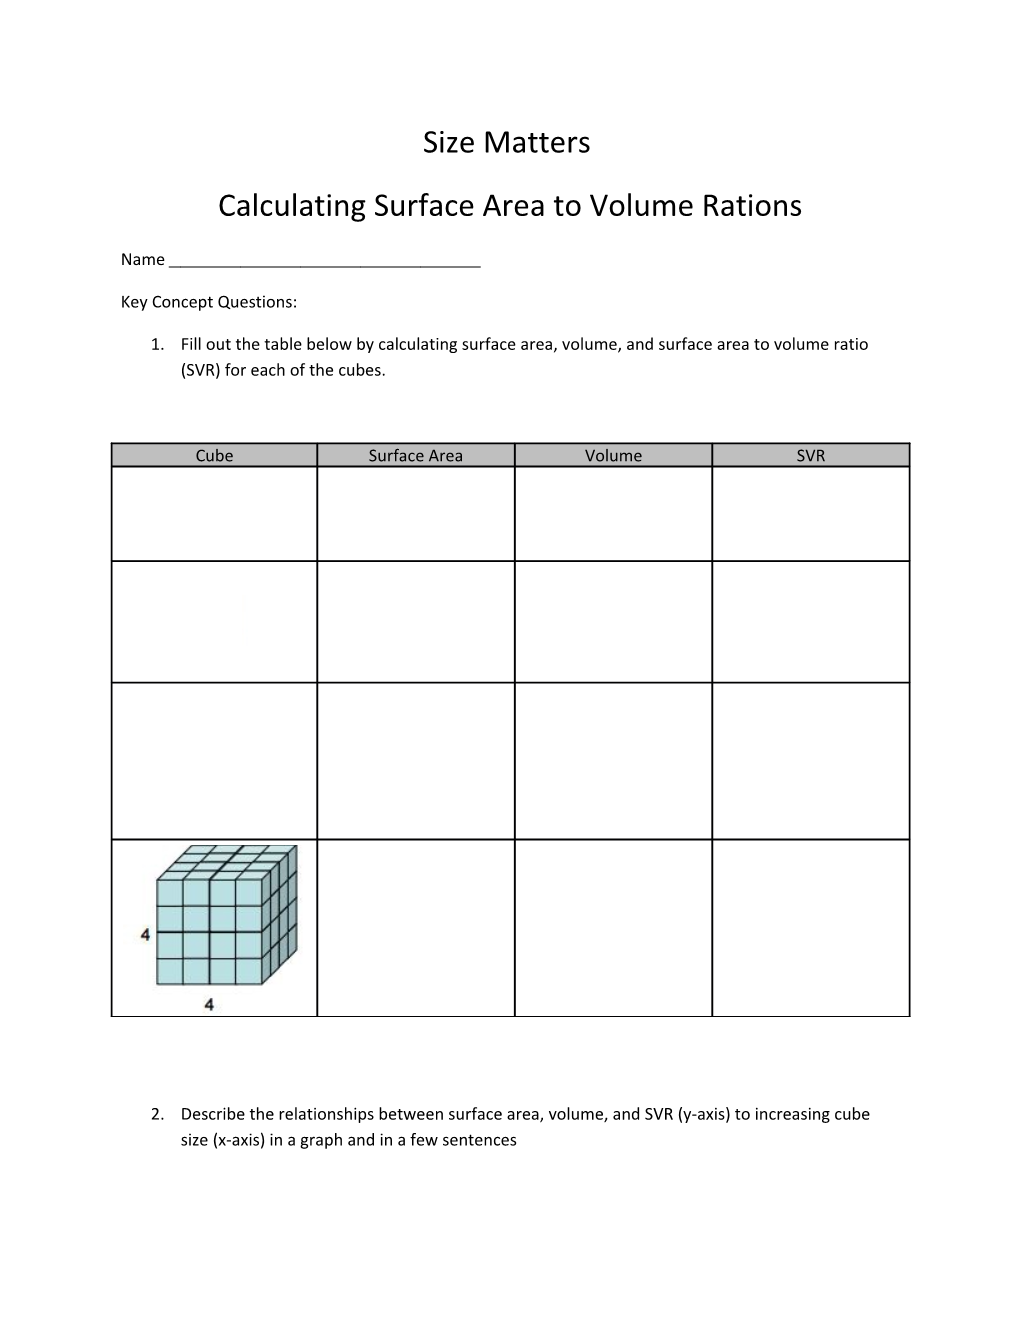 Calculating Surface Area to Volume Rations